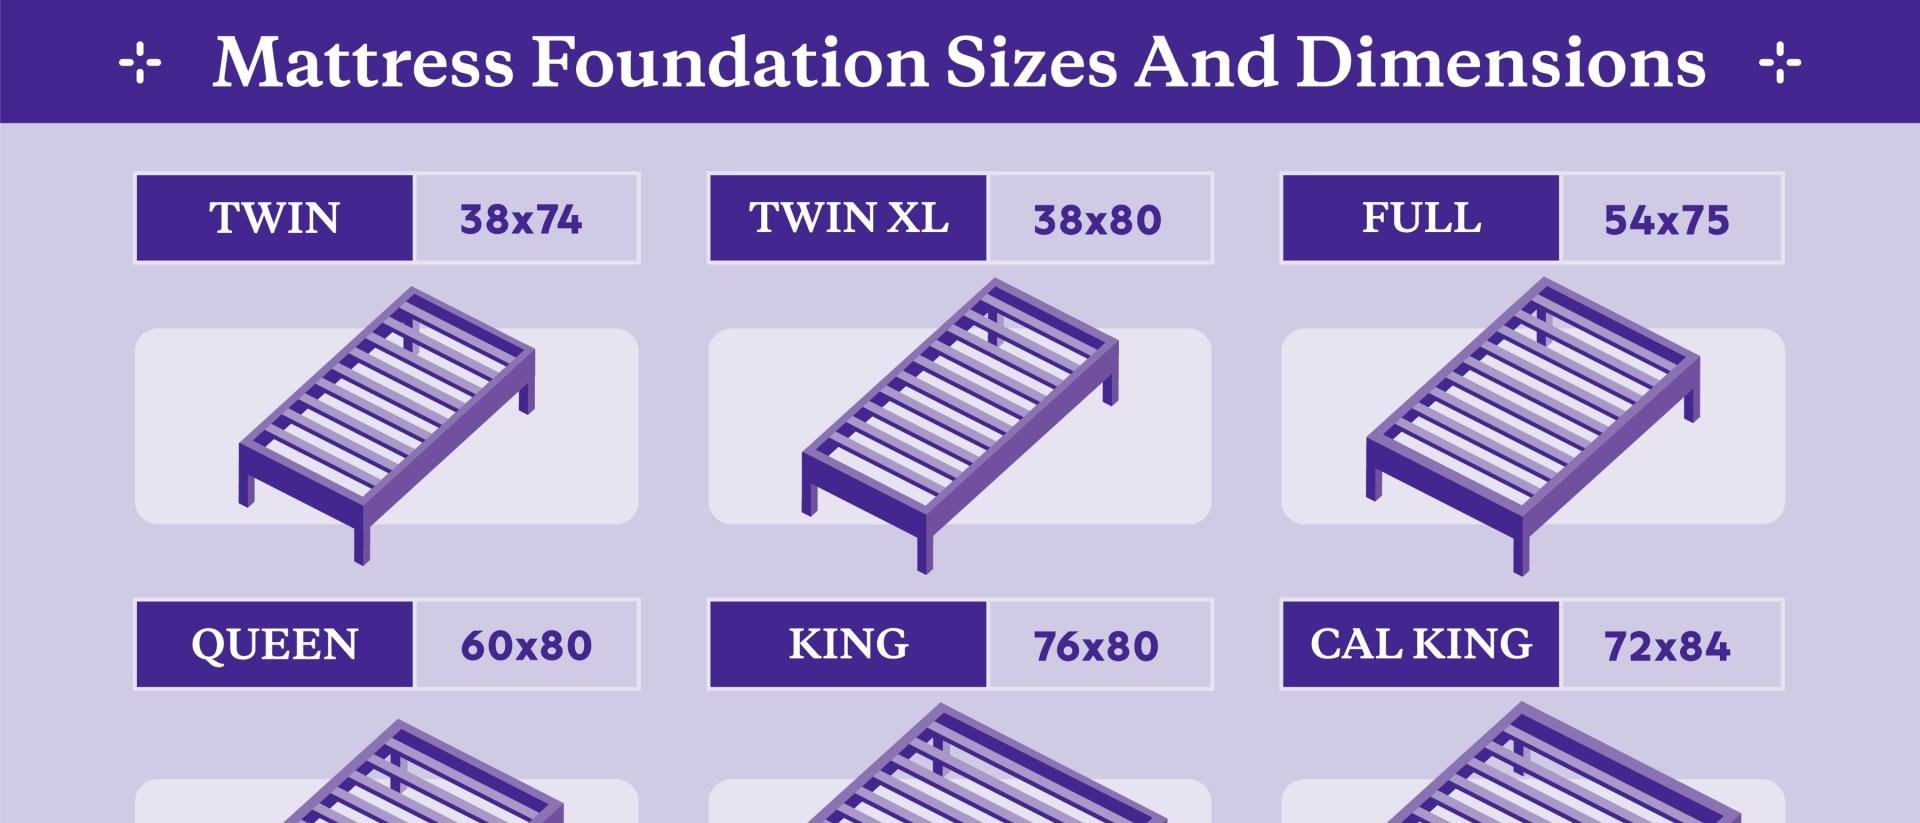 Graphic showing all foundation sizes and dimensions